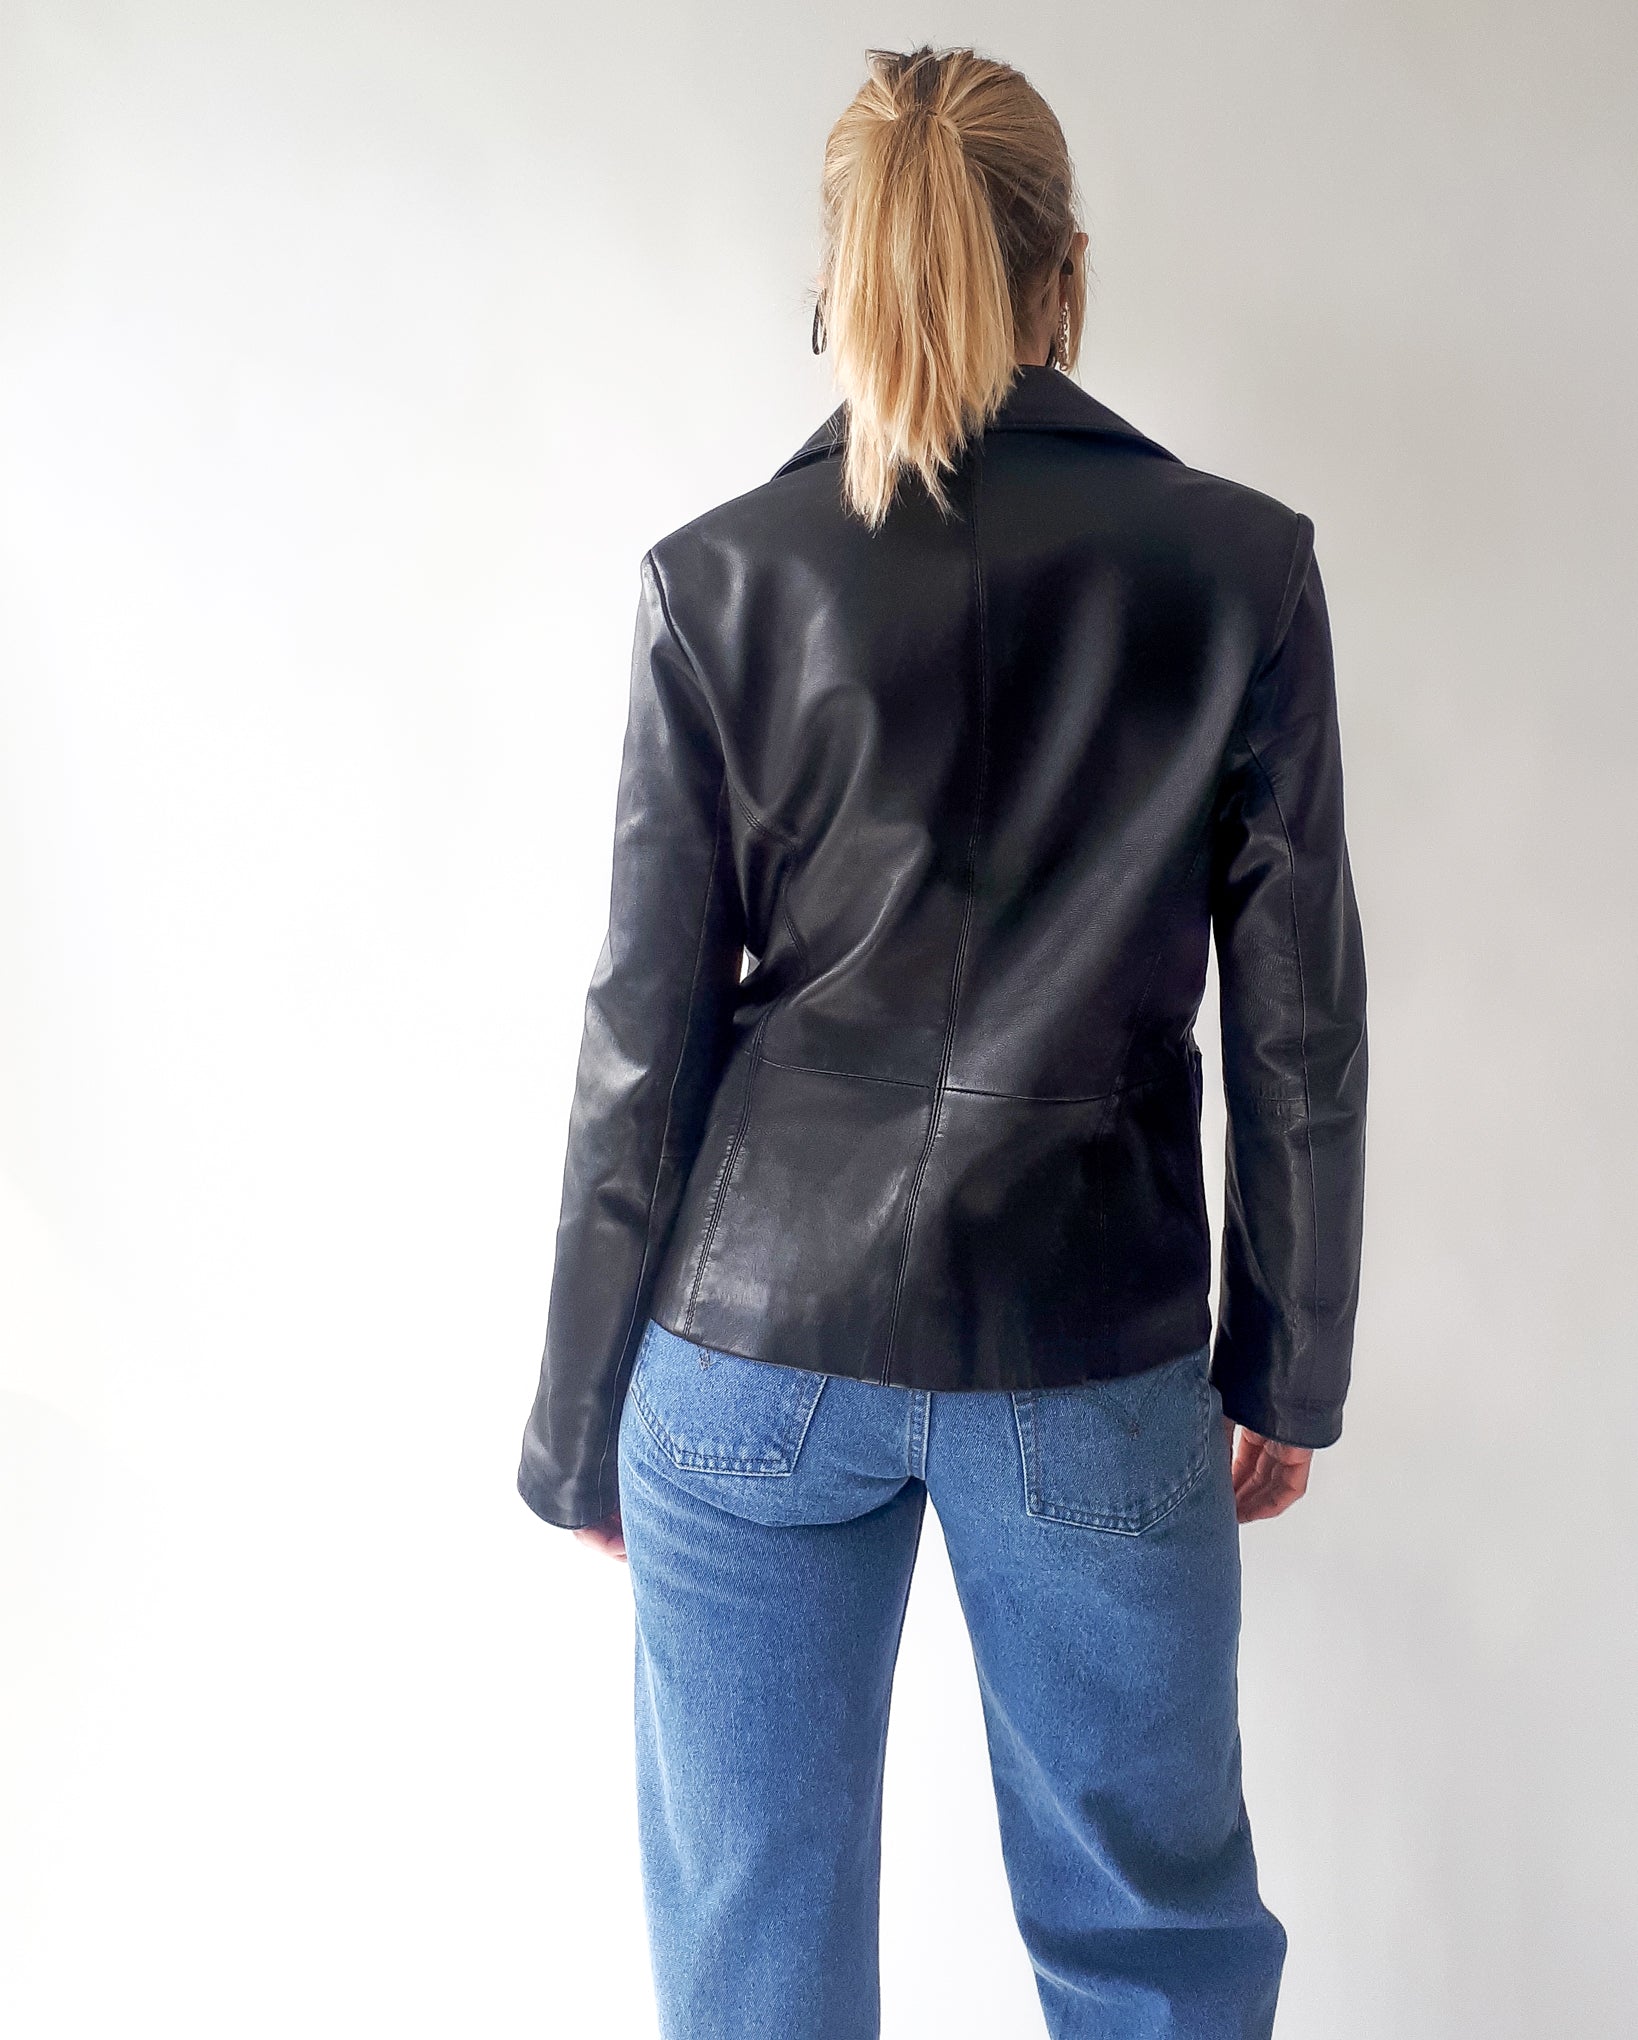 Vintage Black Leather Blazer With Buttery Soft Leather and Two Front Pockets